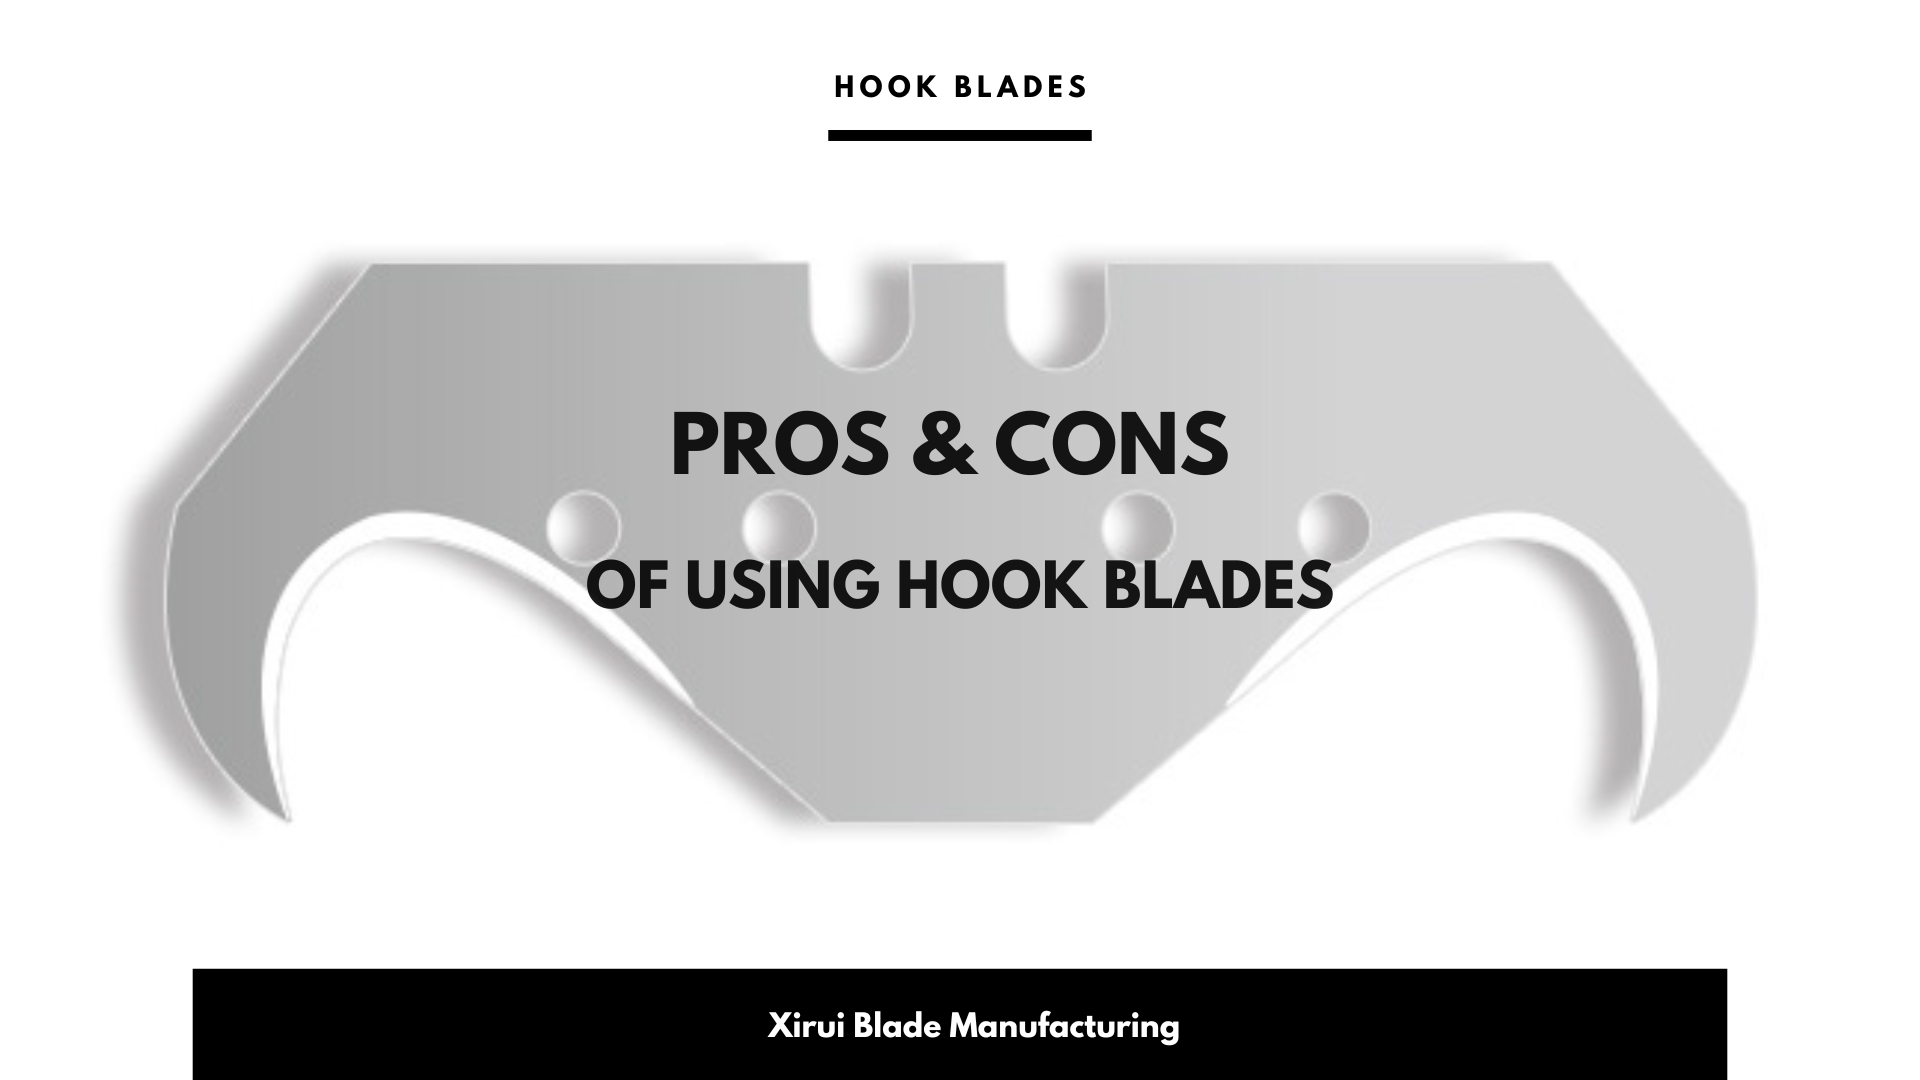 The Pros and Cons of Using Hook Blades for Home Improvement Projects